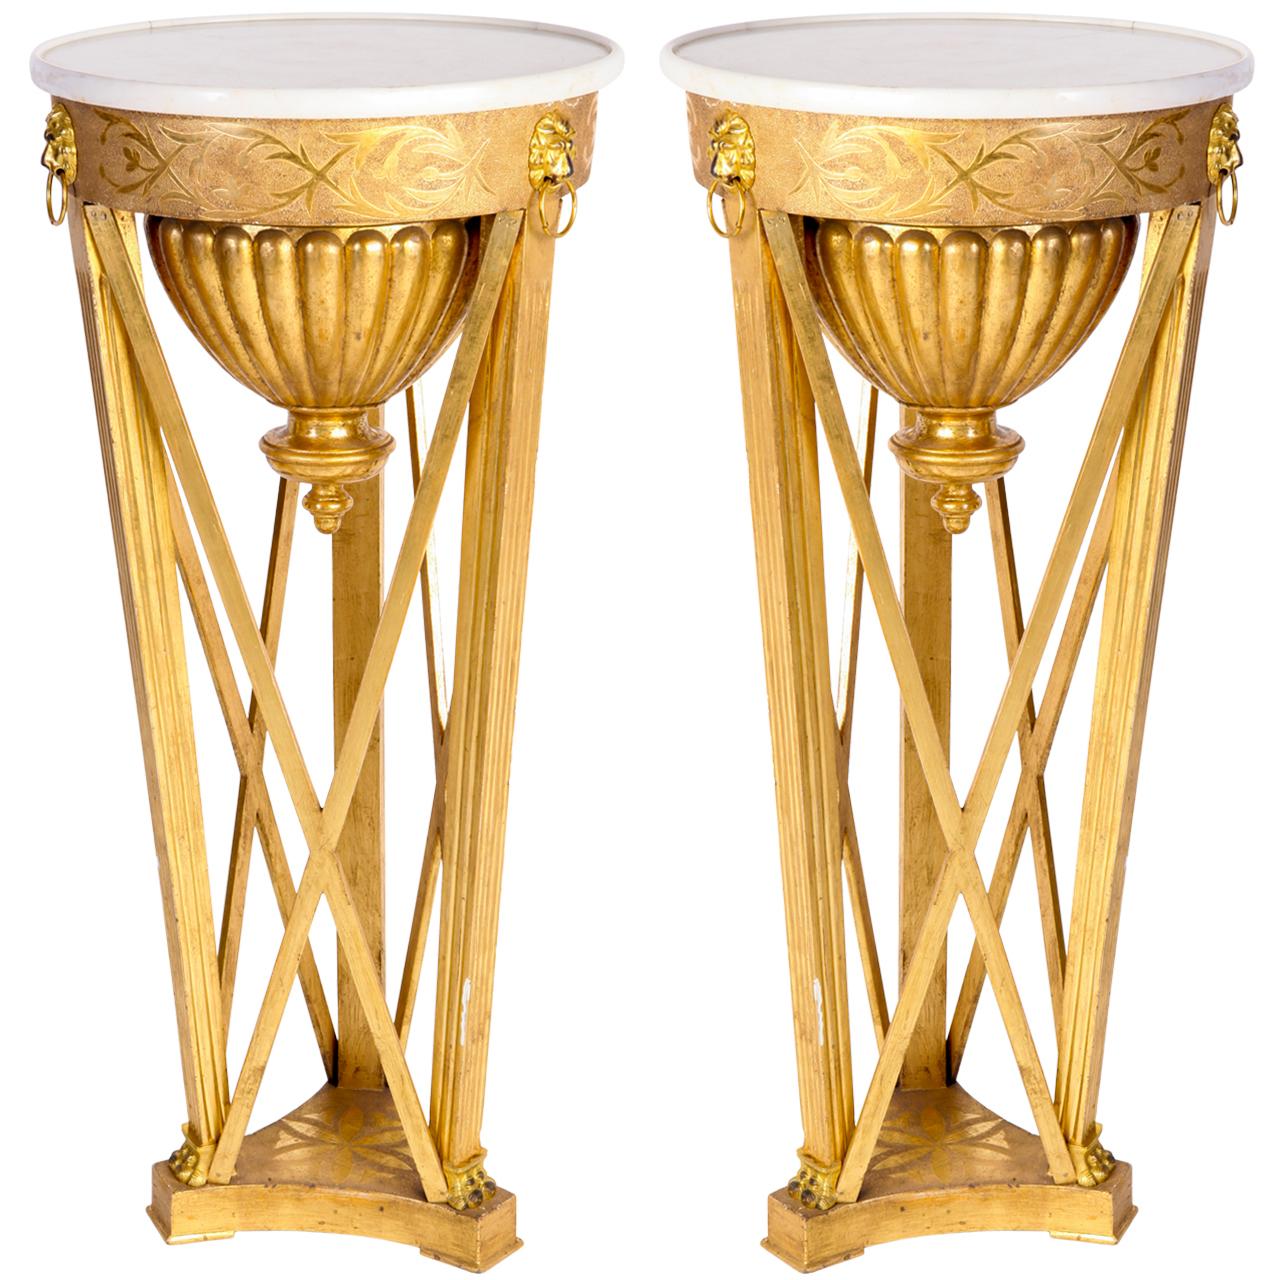 Pair of Italian Neoclassical Guéridons or Side Tables Tuscany, 1830